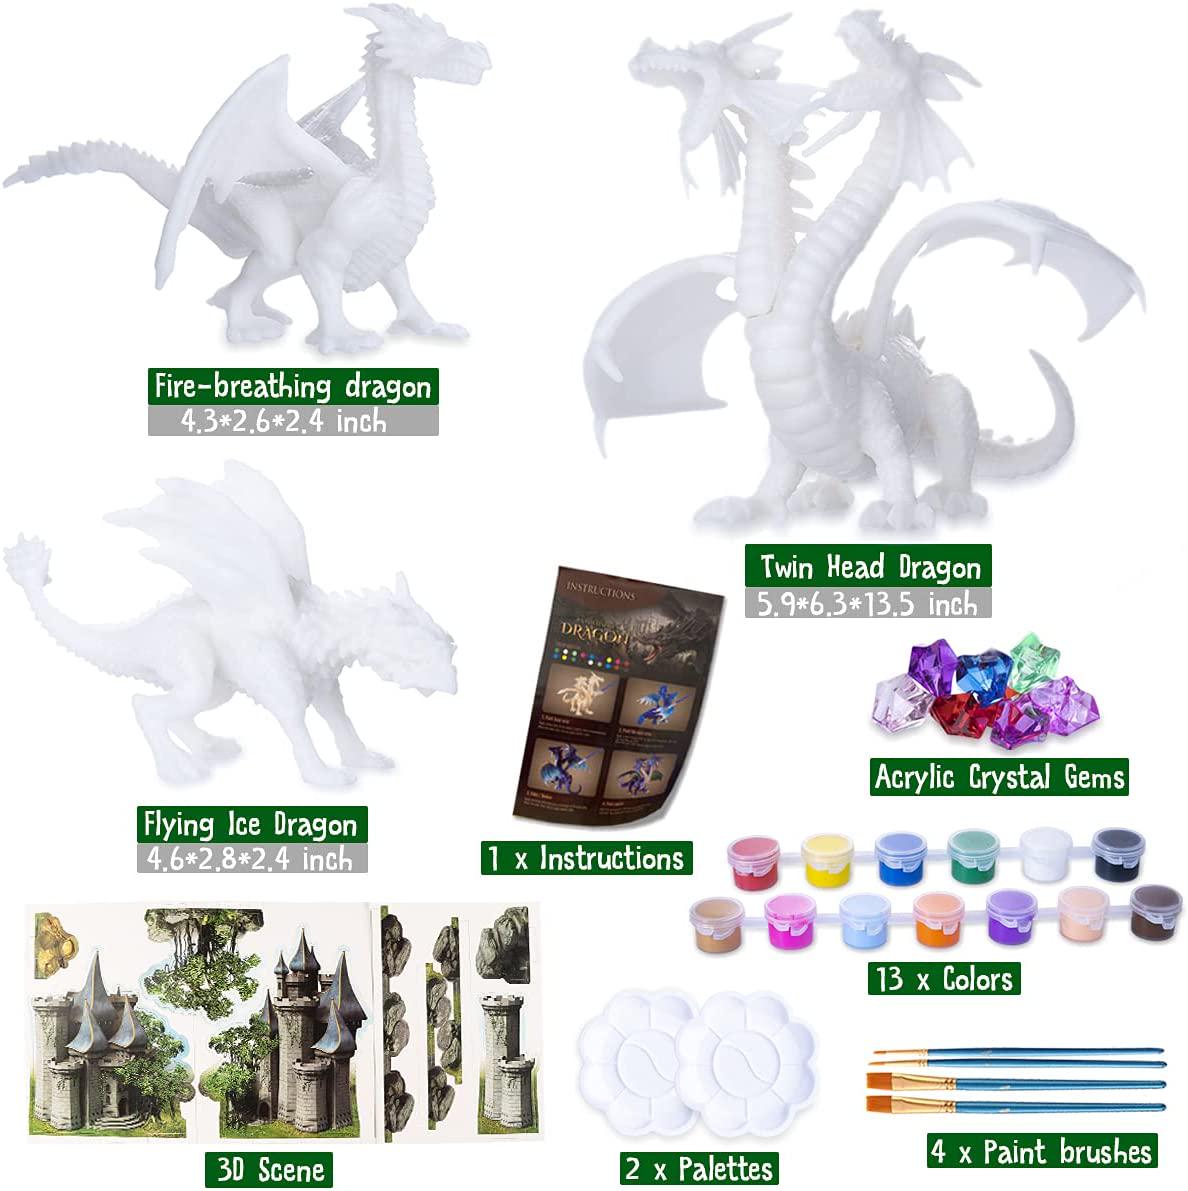 ARTLYMERS, Kids Crafts, DIY 3D Dragon Painting Toys with 13 Color Educational Toy Painting Set Paint Your Own Gift Art and Craft Kit for Kids Boys Girls 3 4 5 6 7 8 9 Year Old